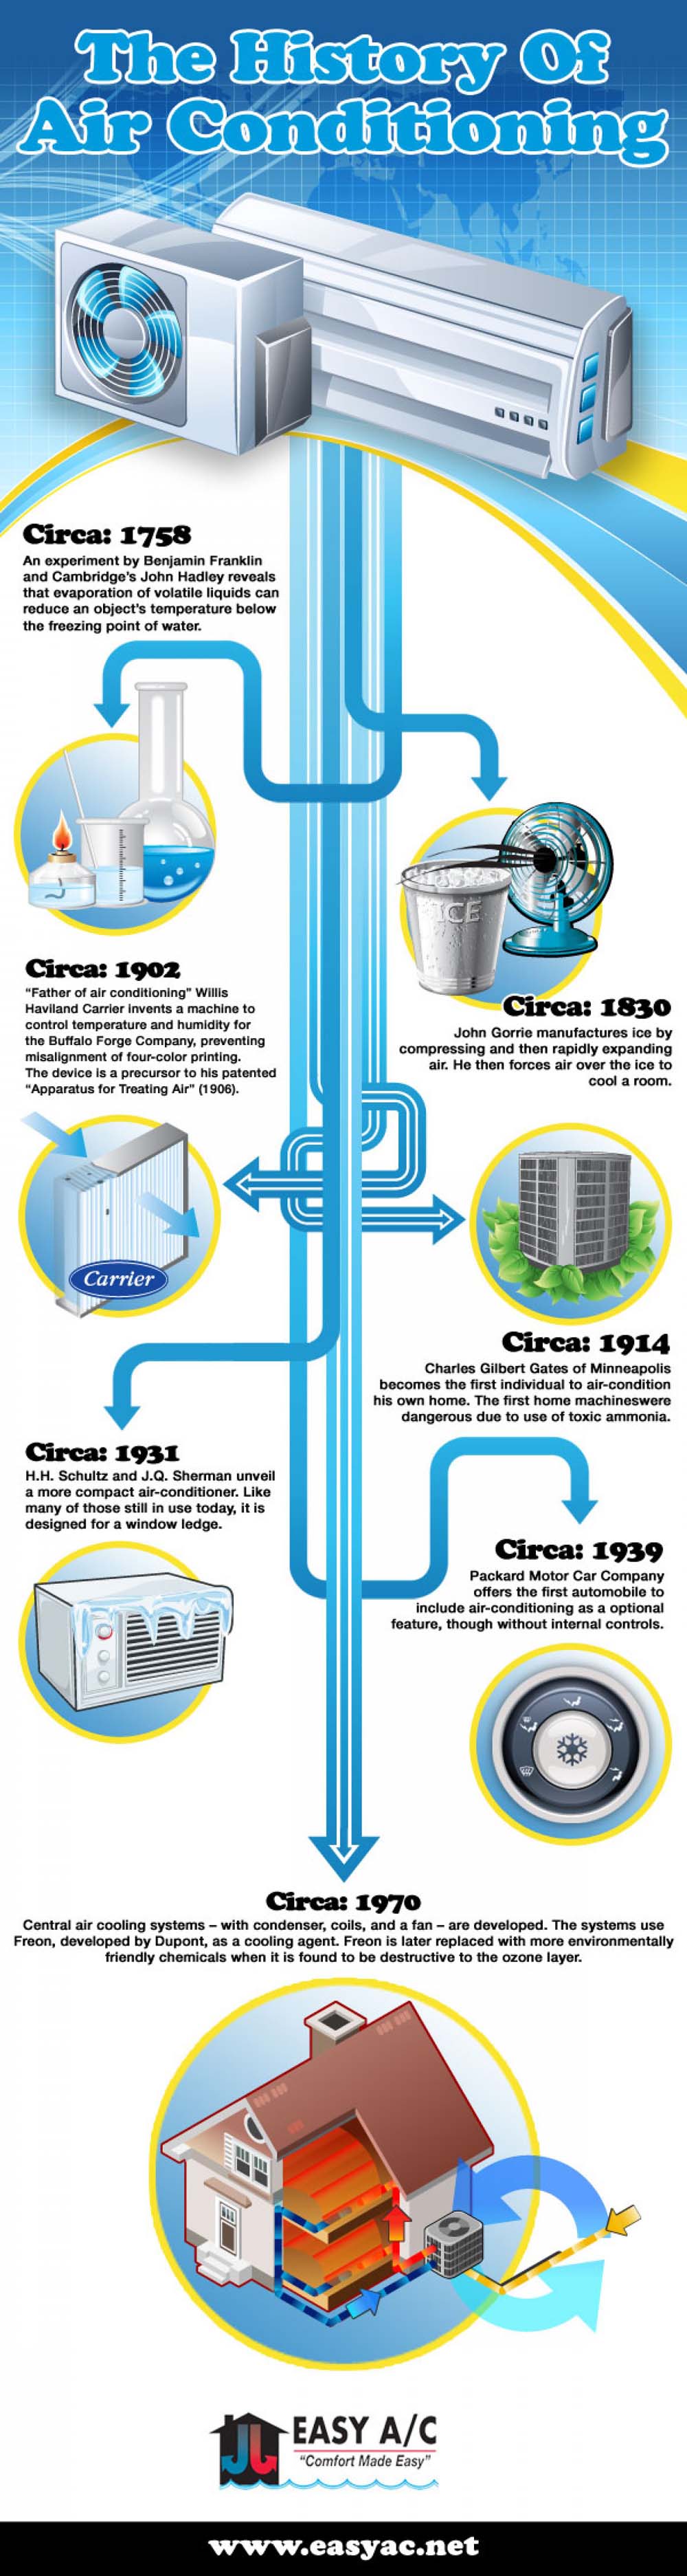 Air Conditioning History